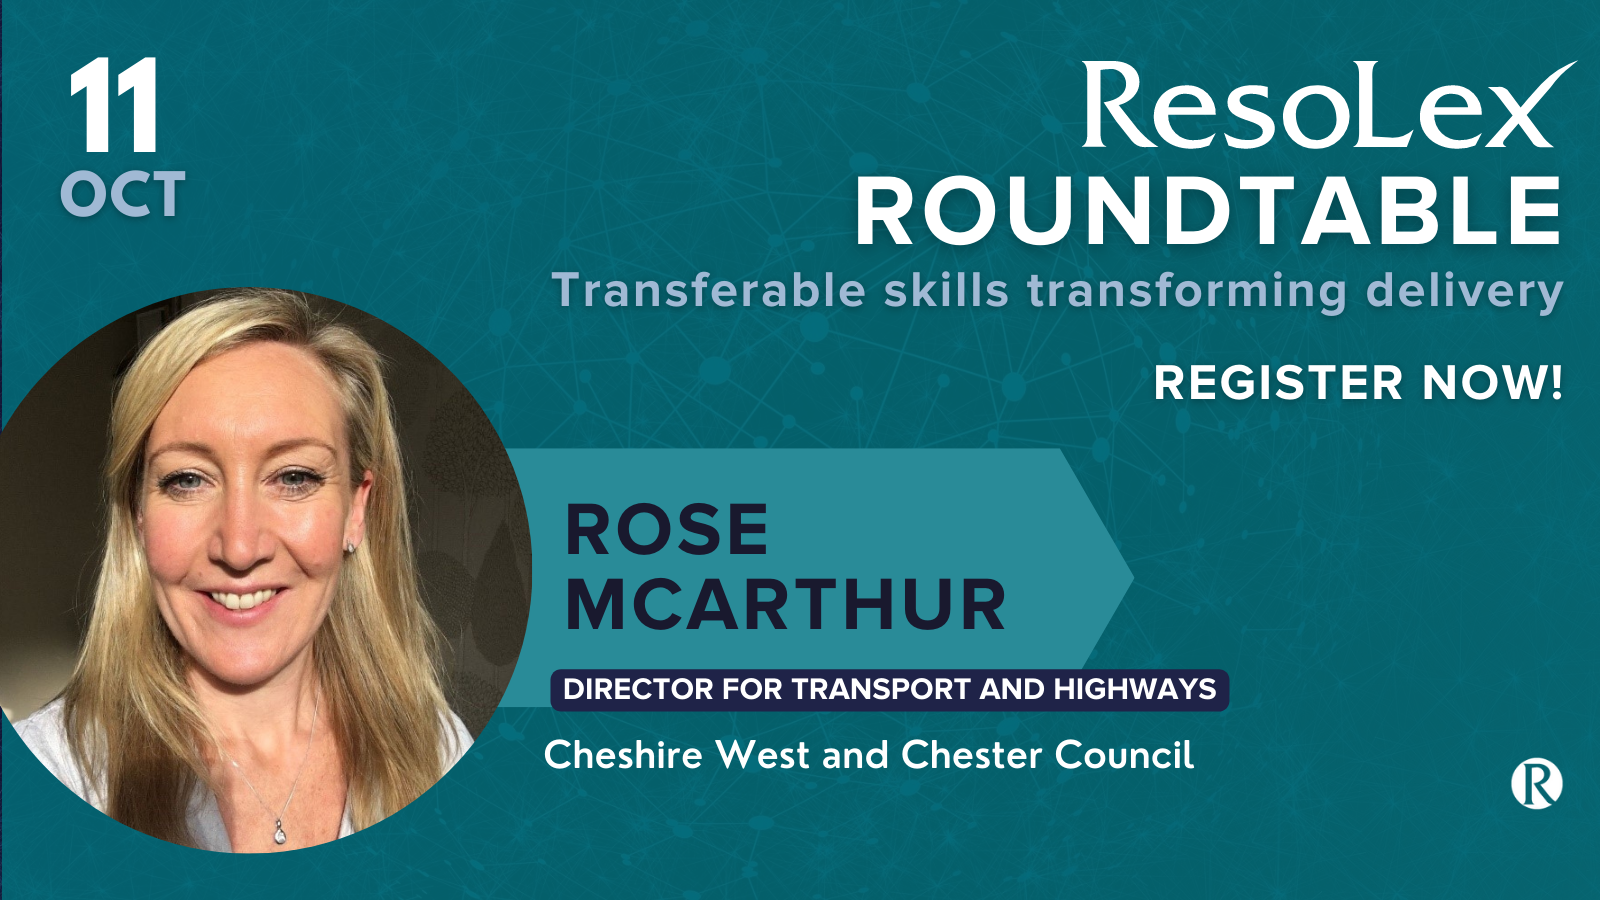 Roundtable with Rose McArthur